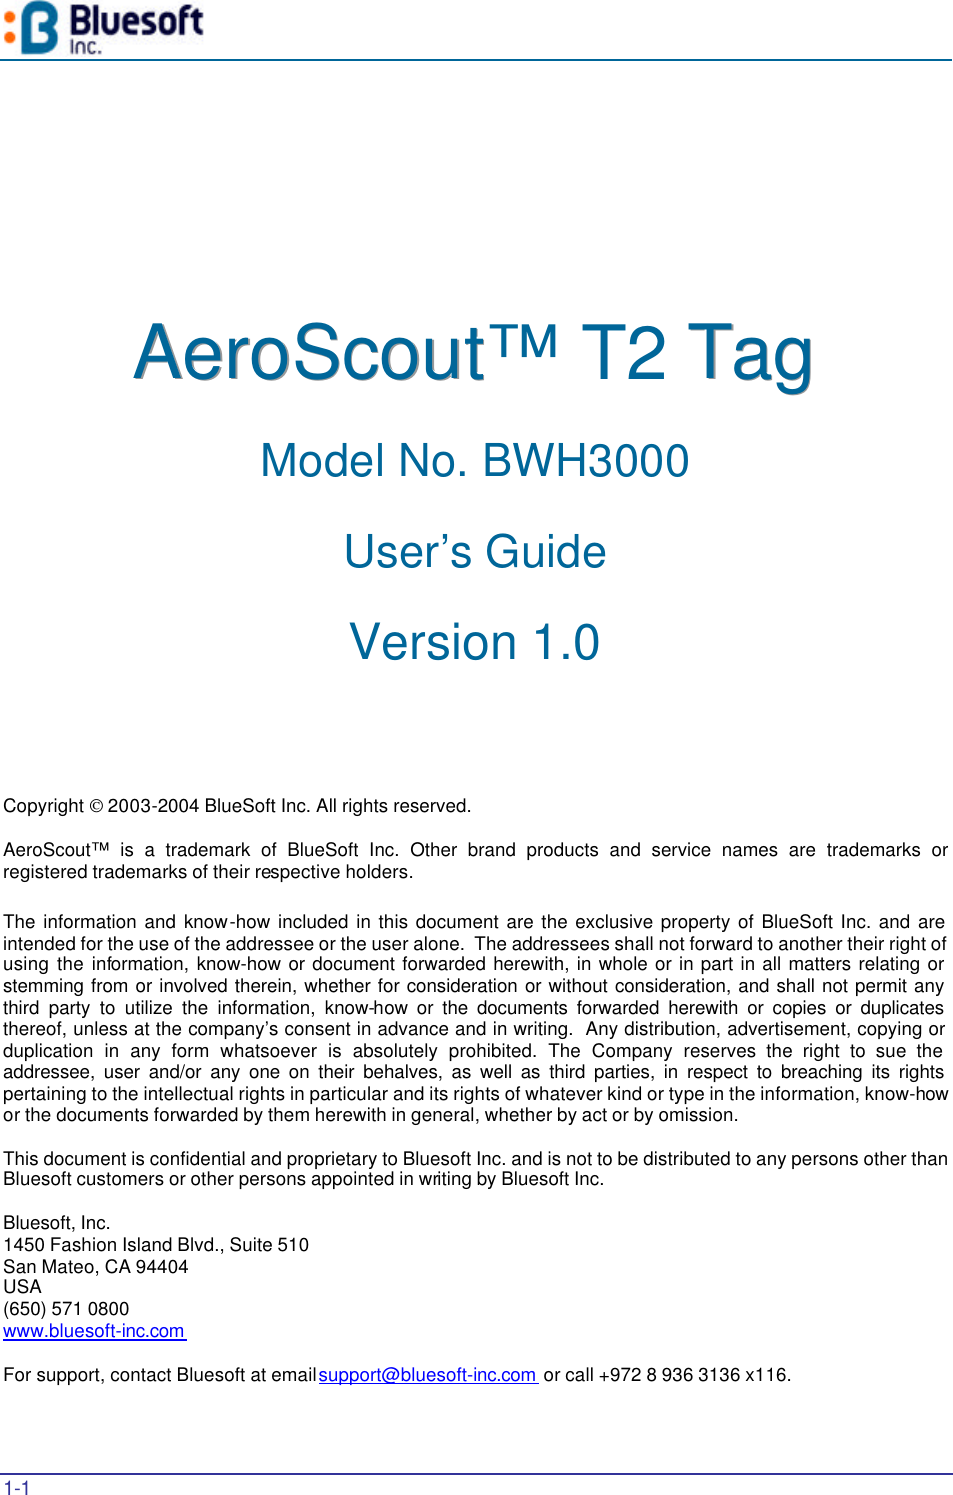  1-1   AAAeeerrroooSSScccooouuuttt™ T2 TTTaaaggg   Model No. BWH3000 User’s Guide Version 1.0     Copyright  2003-2004 BlueSoft Inc. All rights reserved.  AeroScout™ is a trademark of BlueSoft Inc. Other brand products and service names are trademarks or registered trademarks of their respective holders.  The information and know-how included in this document are the exclusive property of BlueSoft Inc. and are intended for the use of the addressee or the user alone.  The addressees shall not forward to another their right of using the information, know-how or document forwarded herewith, in whole or in part in all matters relating or stemming from or involved therein, whether for consideration or without consideration, and shall not permit any third party to utilize the information, know-how or the documents forwarded herewith or copies or duplicates thereof, unless at the company’s consent in advance and in writing.  Any distribution, advertisement, copying or duplication in any form whatsoever is absolutely prohibited. The Company reserves the right to sue the addressee, user and/or any one on their behalves, as well as third parties, in respect to breaching its rights pertaining to the intellectual rights in particular and its rights of whatever kind or type in the information, know-how or the documents forwarded by them herewith in general, whether by act or by omission.  This document is confidential and proprietary to Bluesoft Inc. and is not to be distributed to any persons other than Bluesoft customers or other persons appointed in writing by Bluesoft Inc.  Bluesoft, Inc. 1450 Fashion Island Blvd., Suite 510 San Mateo, CA 94404 USA (650) 571 0800 www.bluesoft-inc.com   For support, contact Bluesoft at email support@bluesoft-inc.com  or call +972 8 936 3136 x116. 